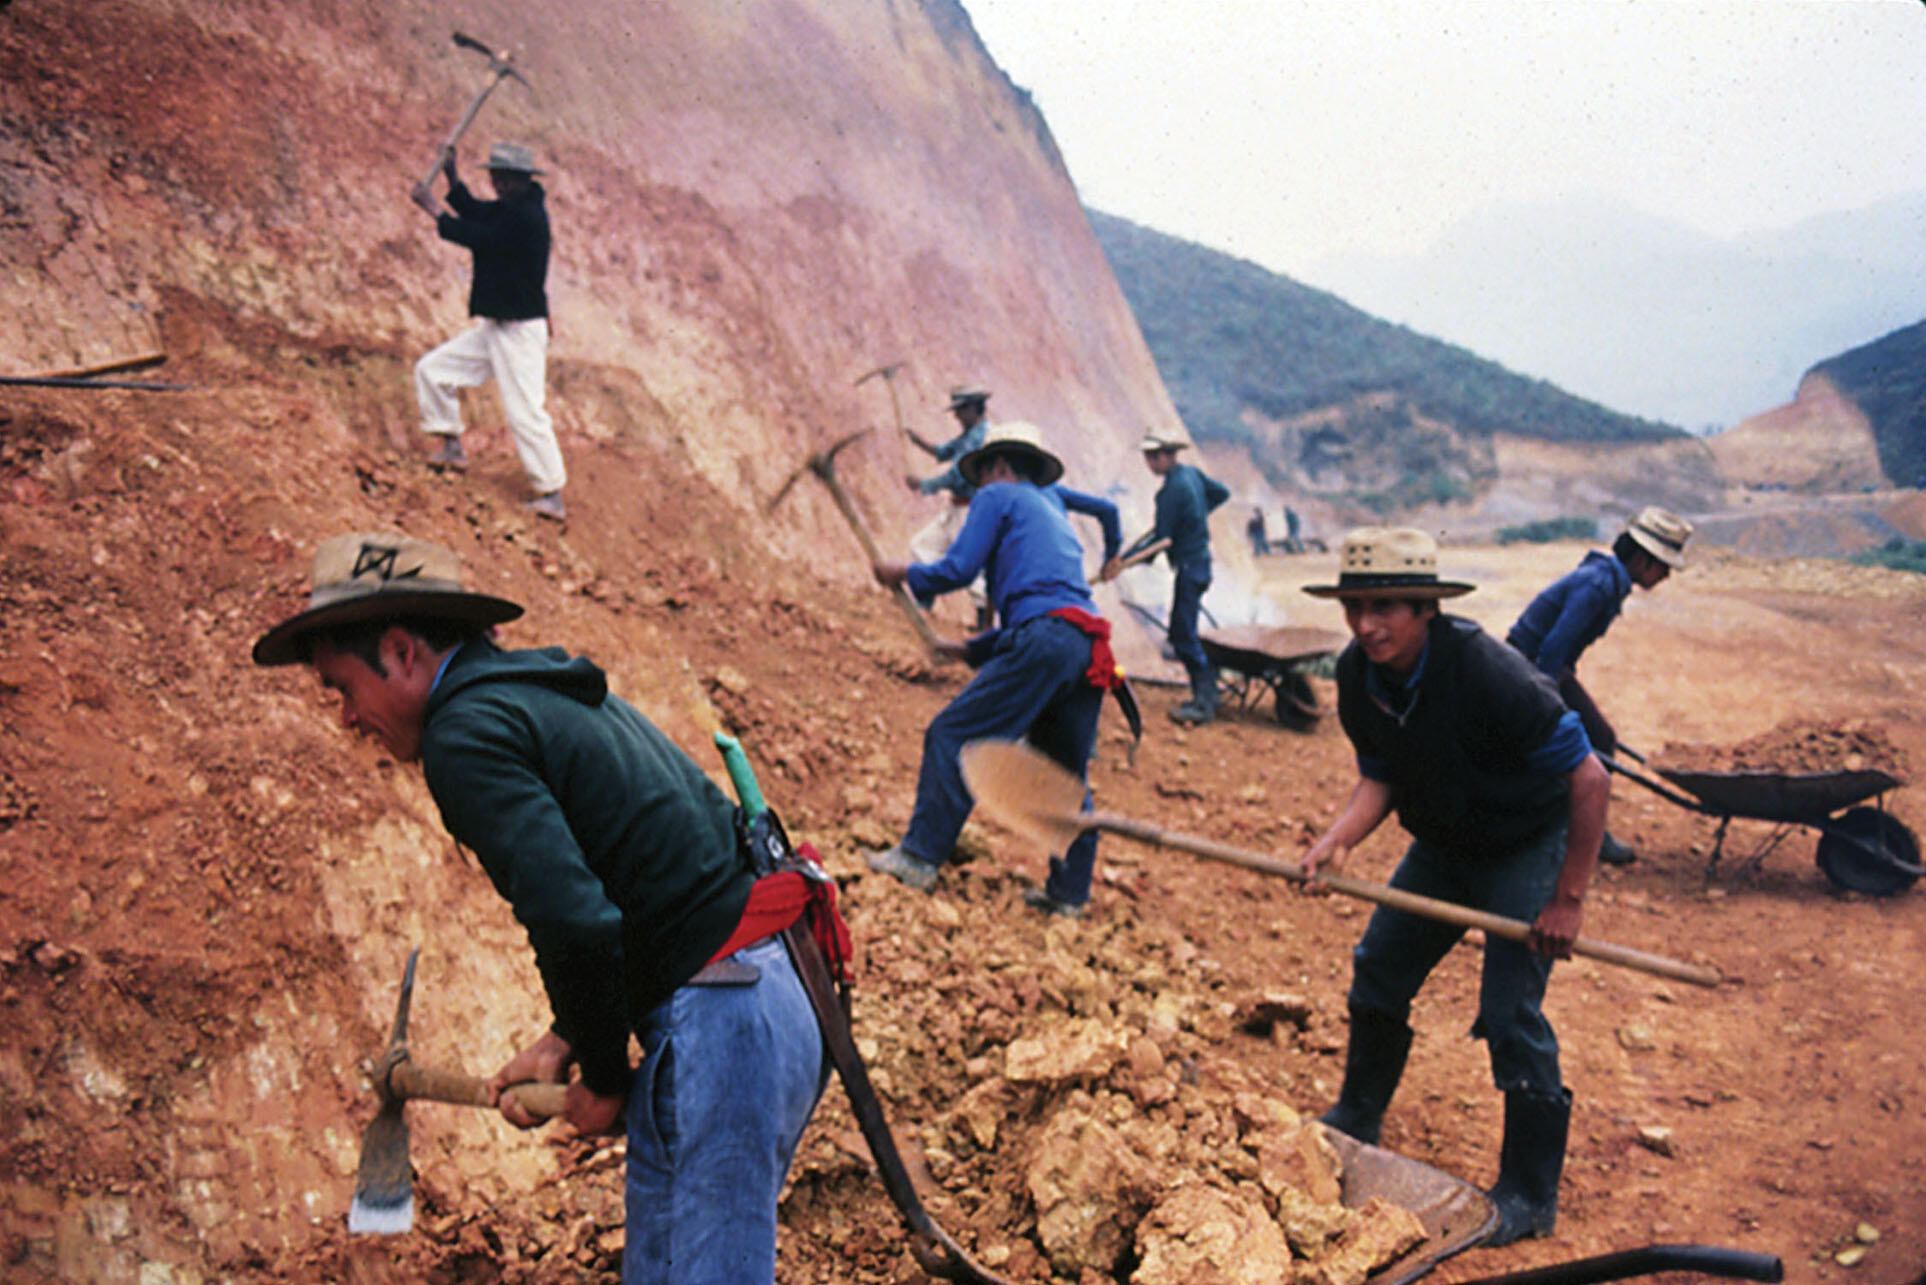 Men with simple picks and shovels are forced to move a hillside to build a road, Ixil region, Guatemala, March 1983. (Photo courtesy of Beatriz Manz.)